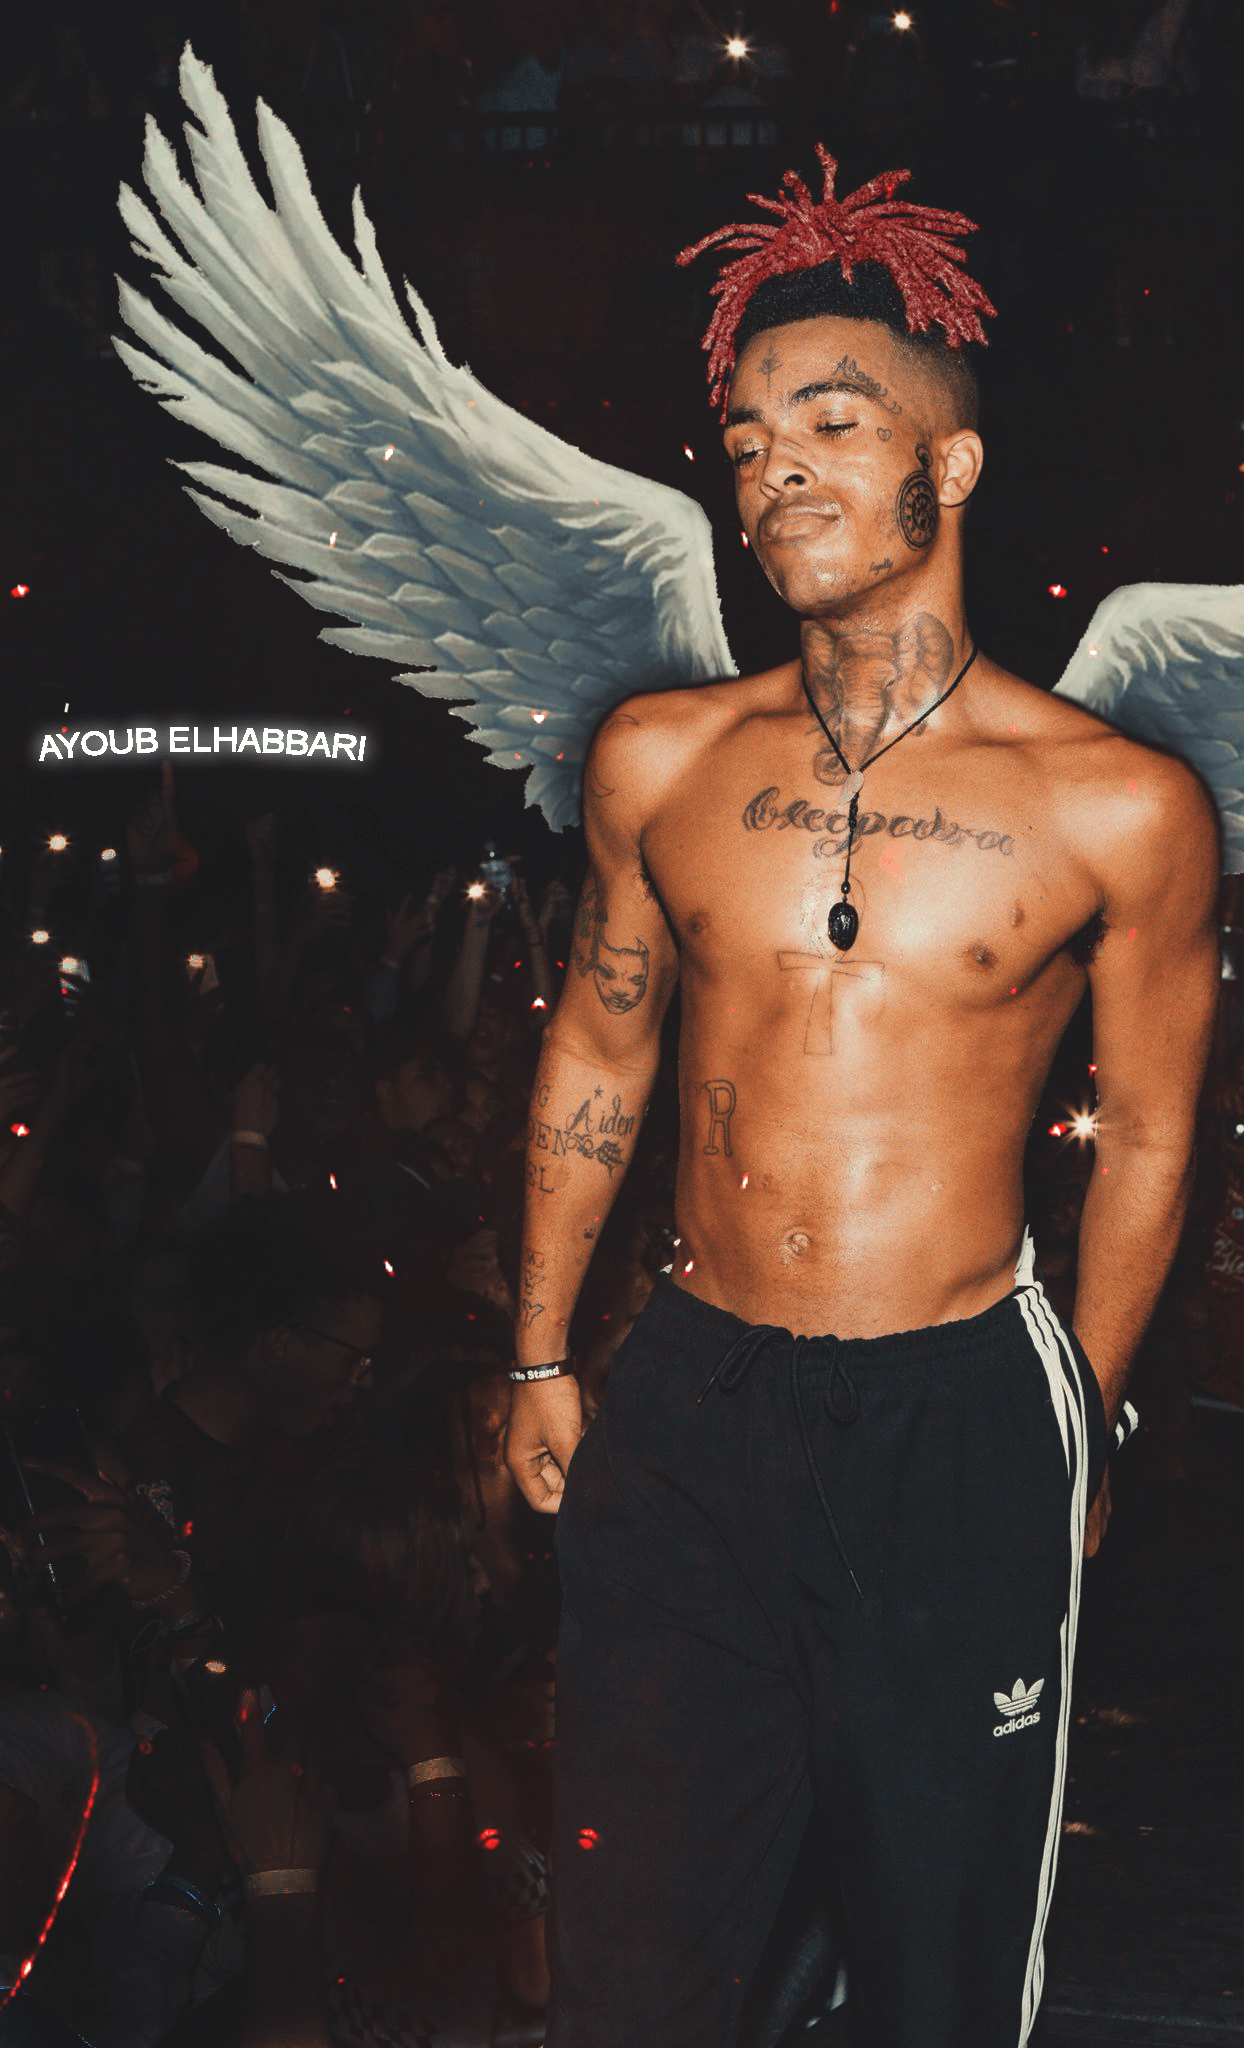 A shirtless 21 Savage with white wings on his back. - XXXTentacion